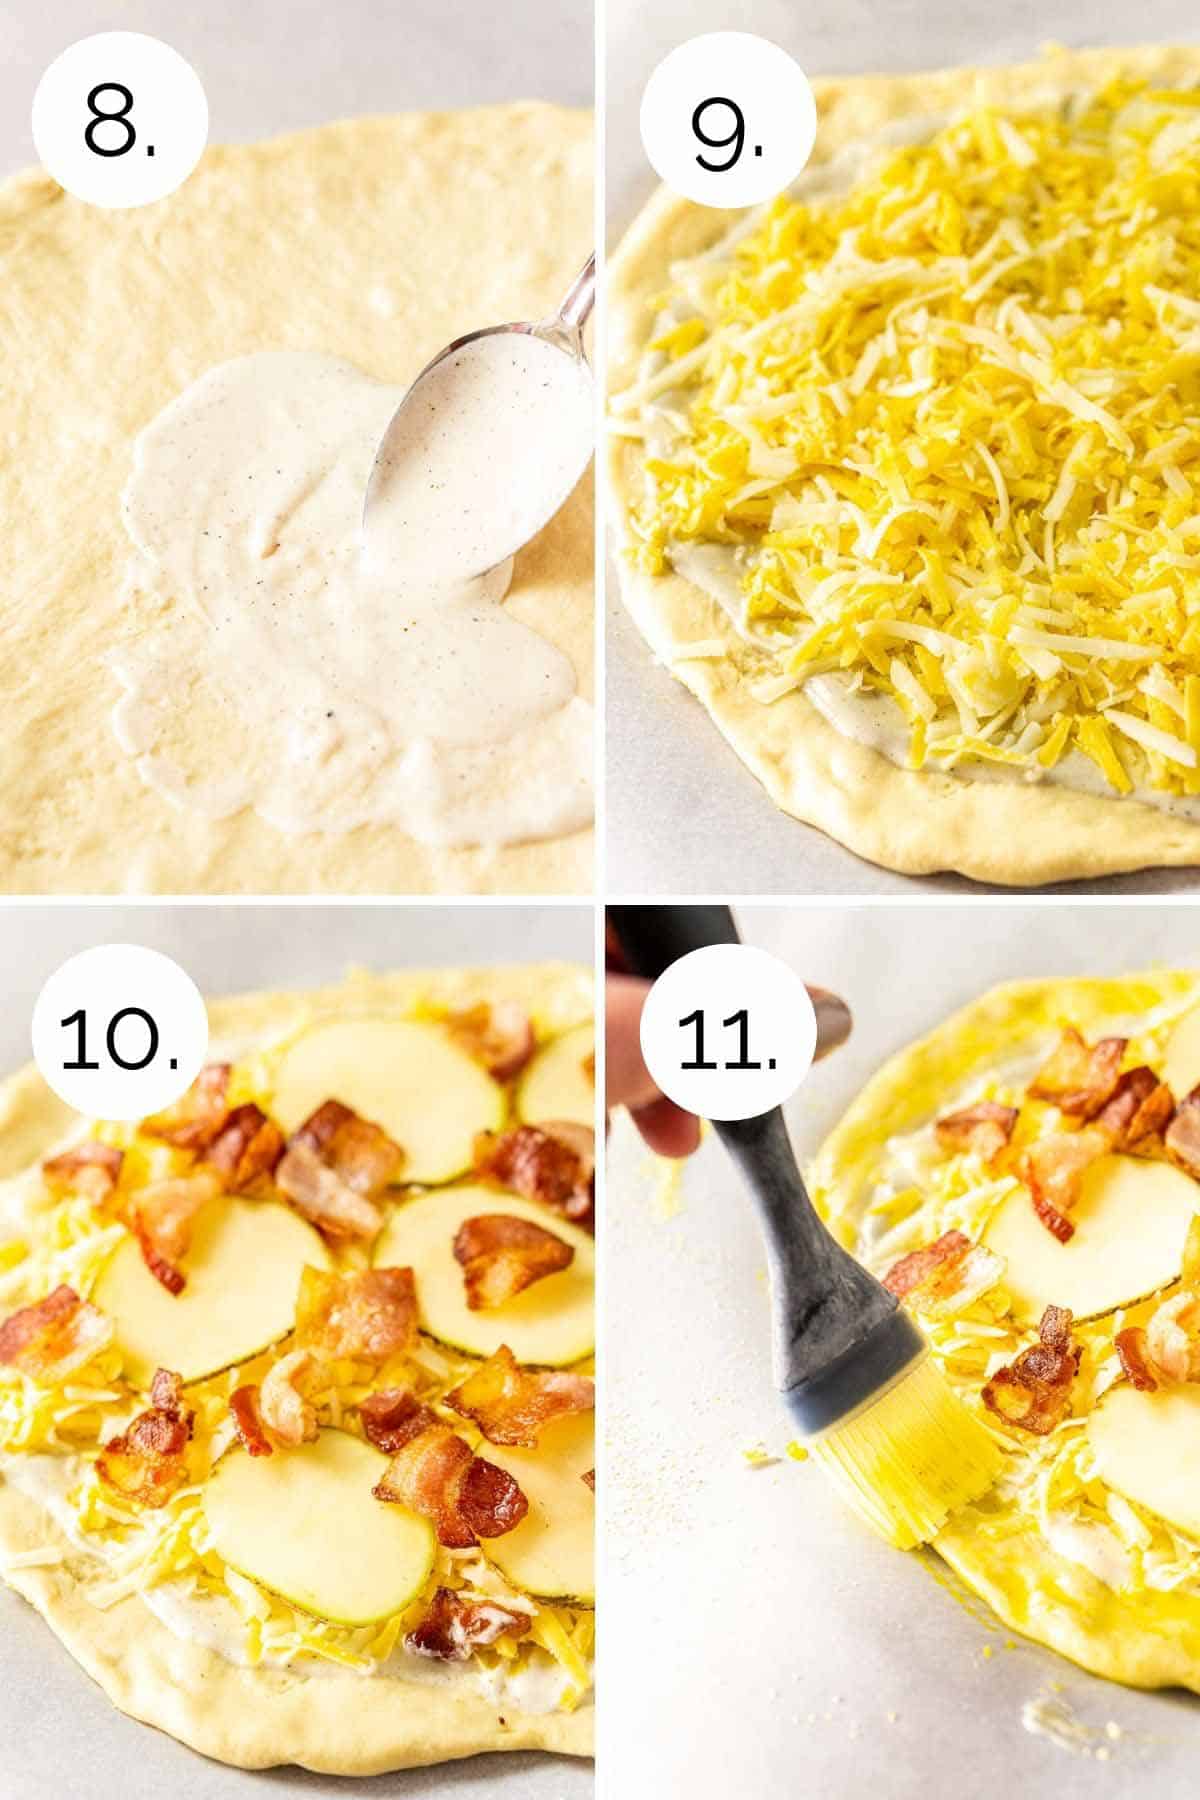 A collage showing the process of adding the toppings to the dough.